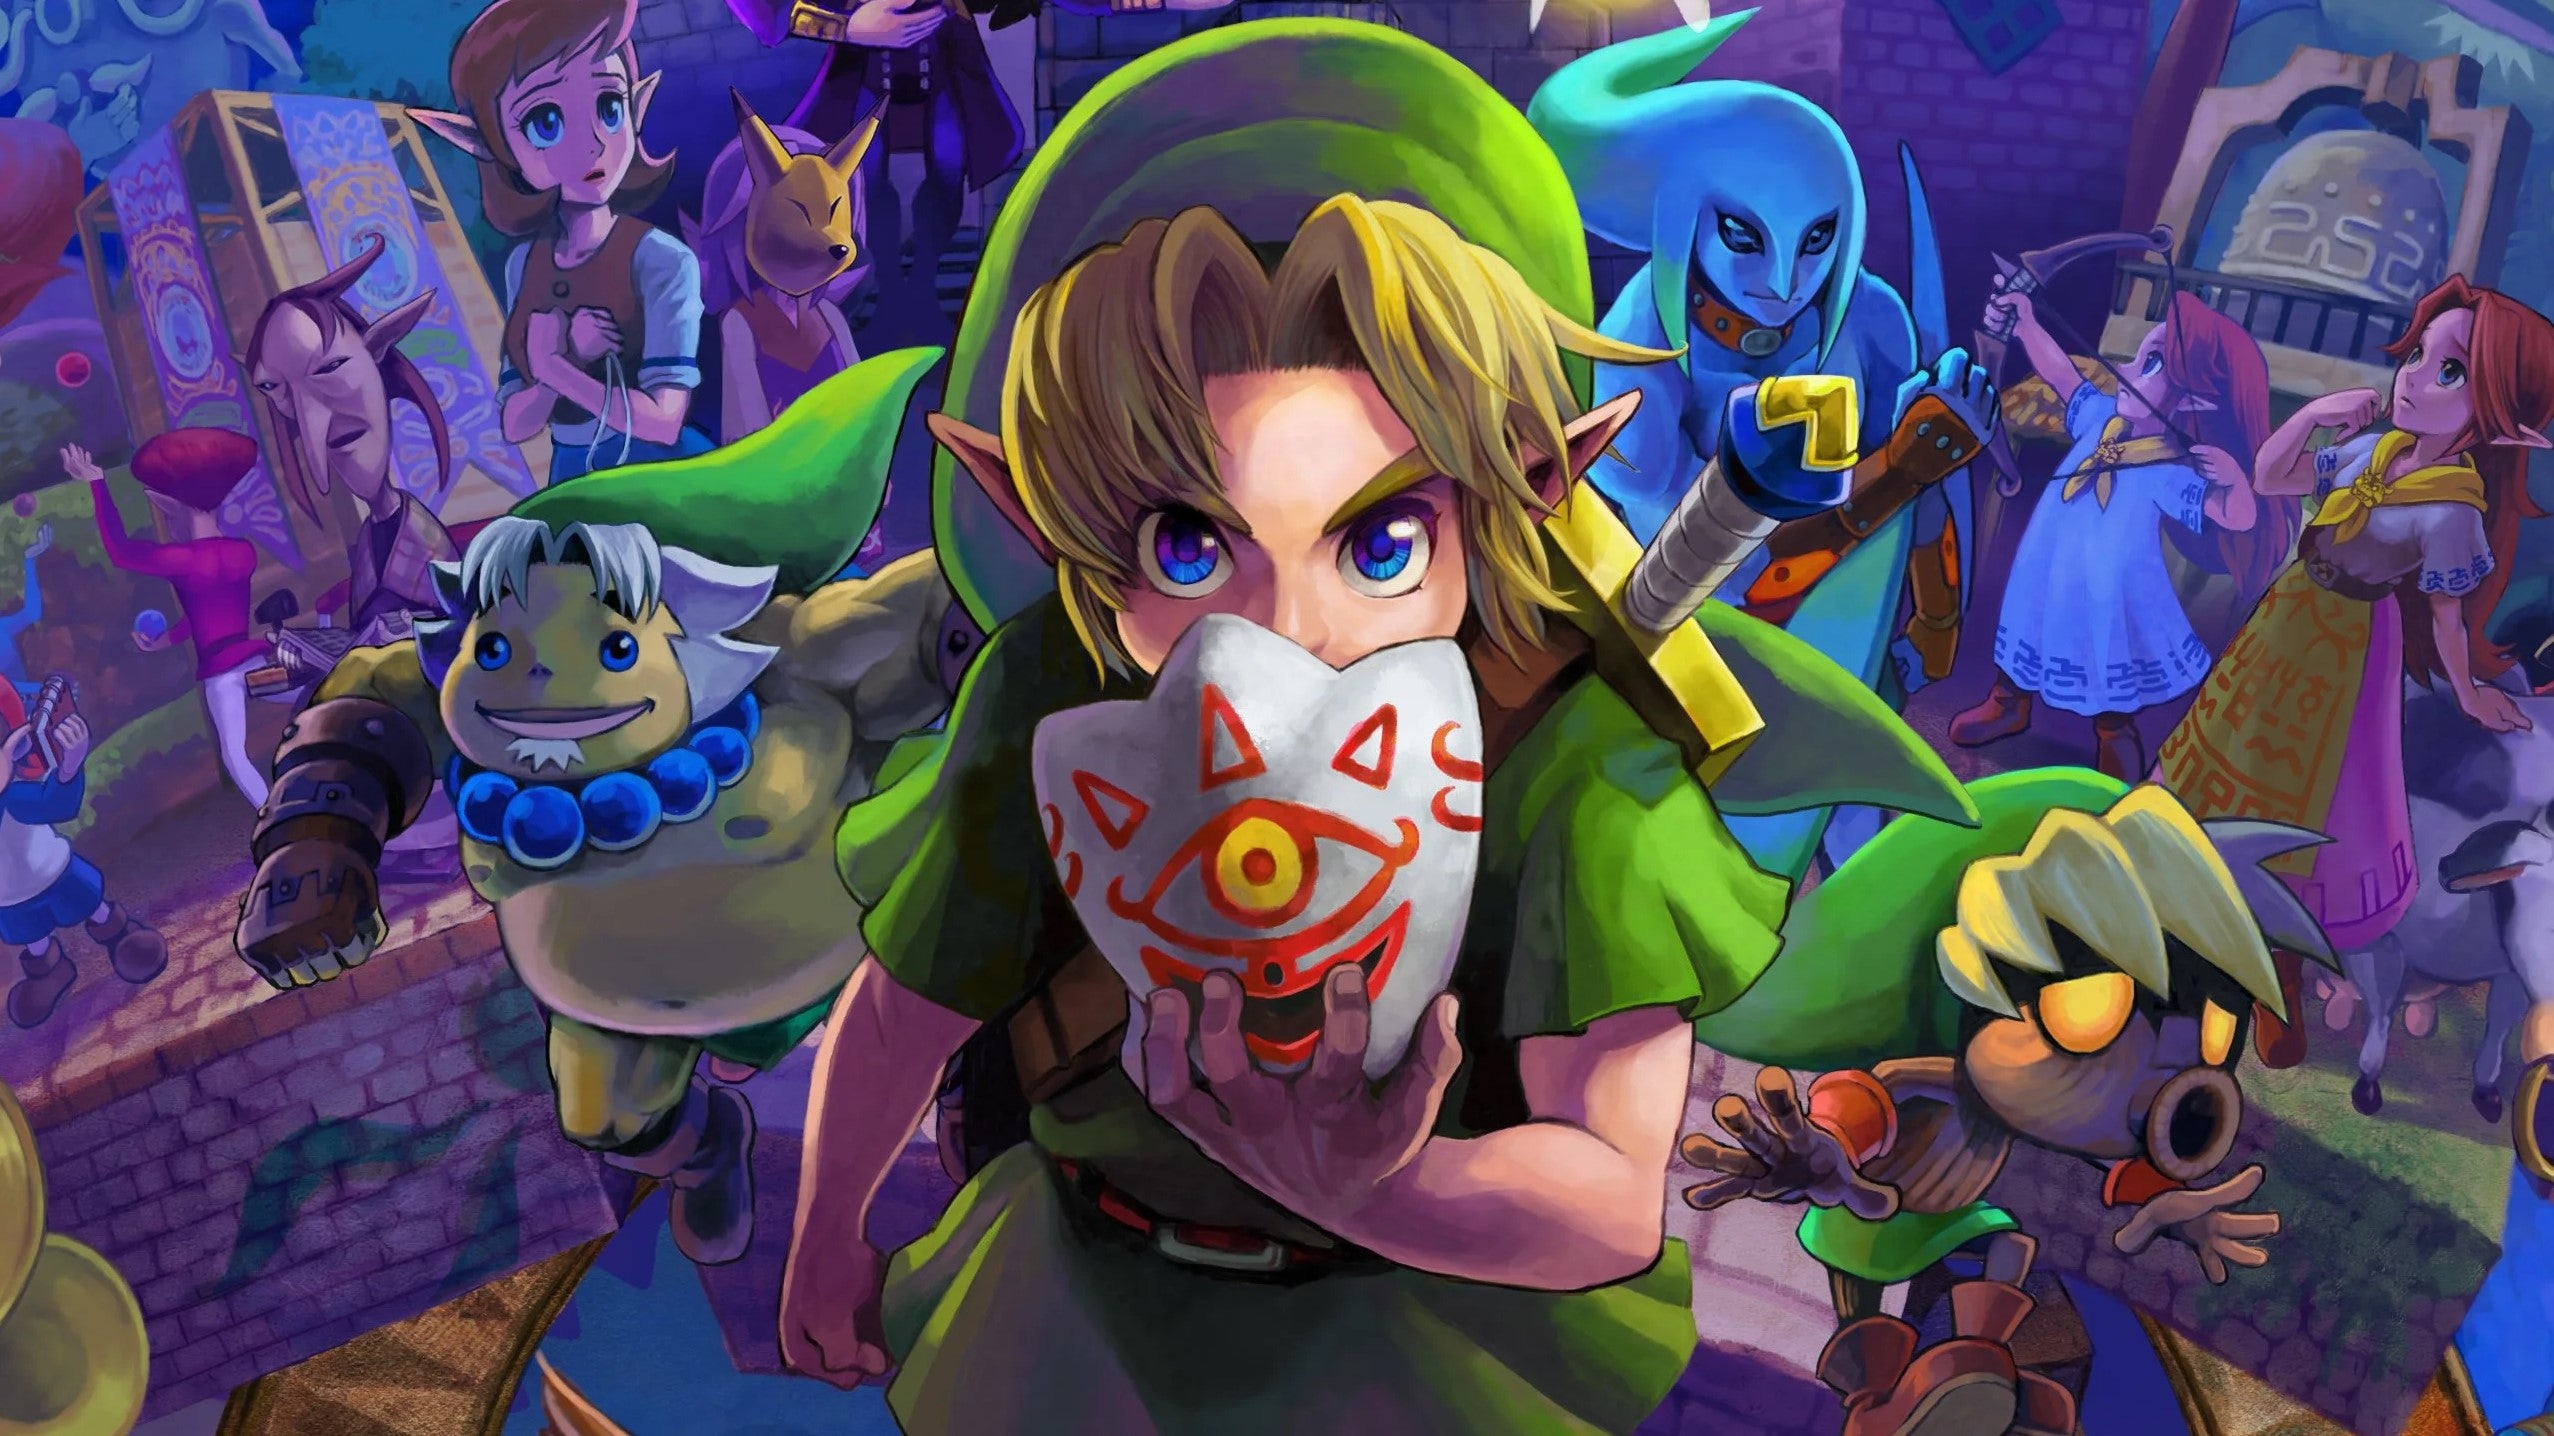 An illustration for Zelda game Majora's Mask, with hero Link standing close to the viewer holding Majora's Mask over half of their face.